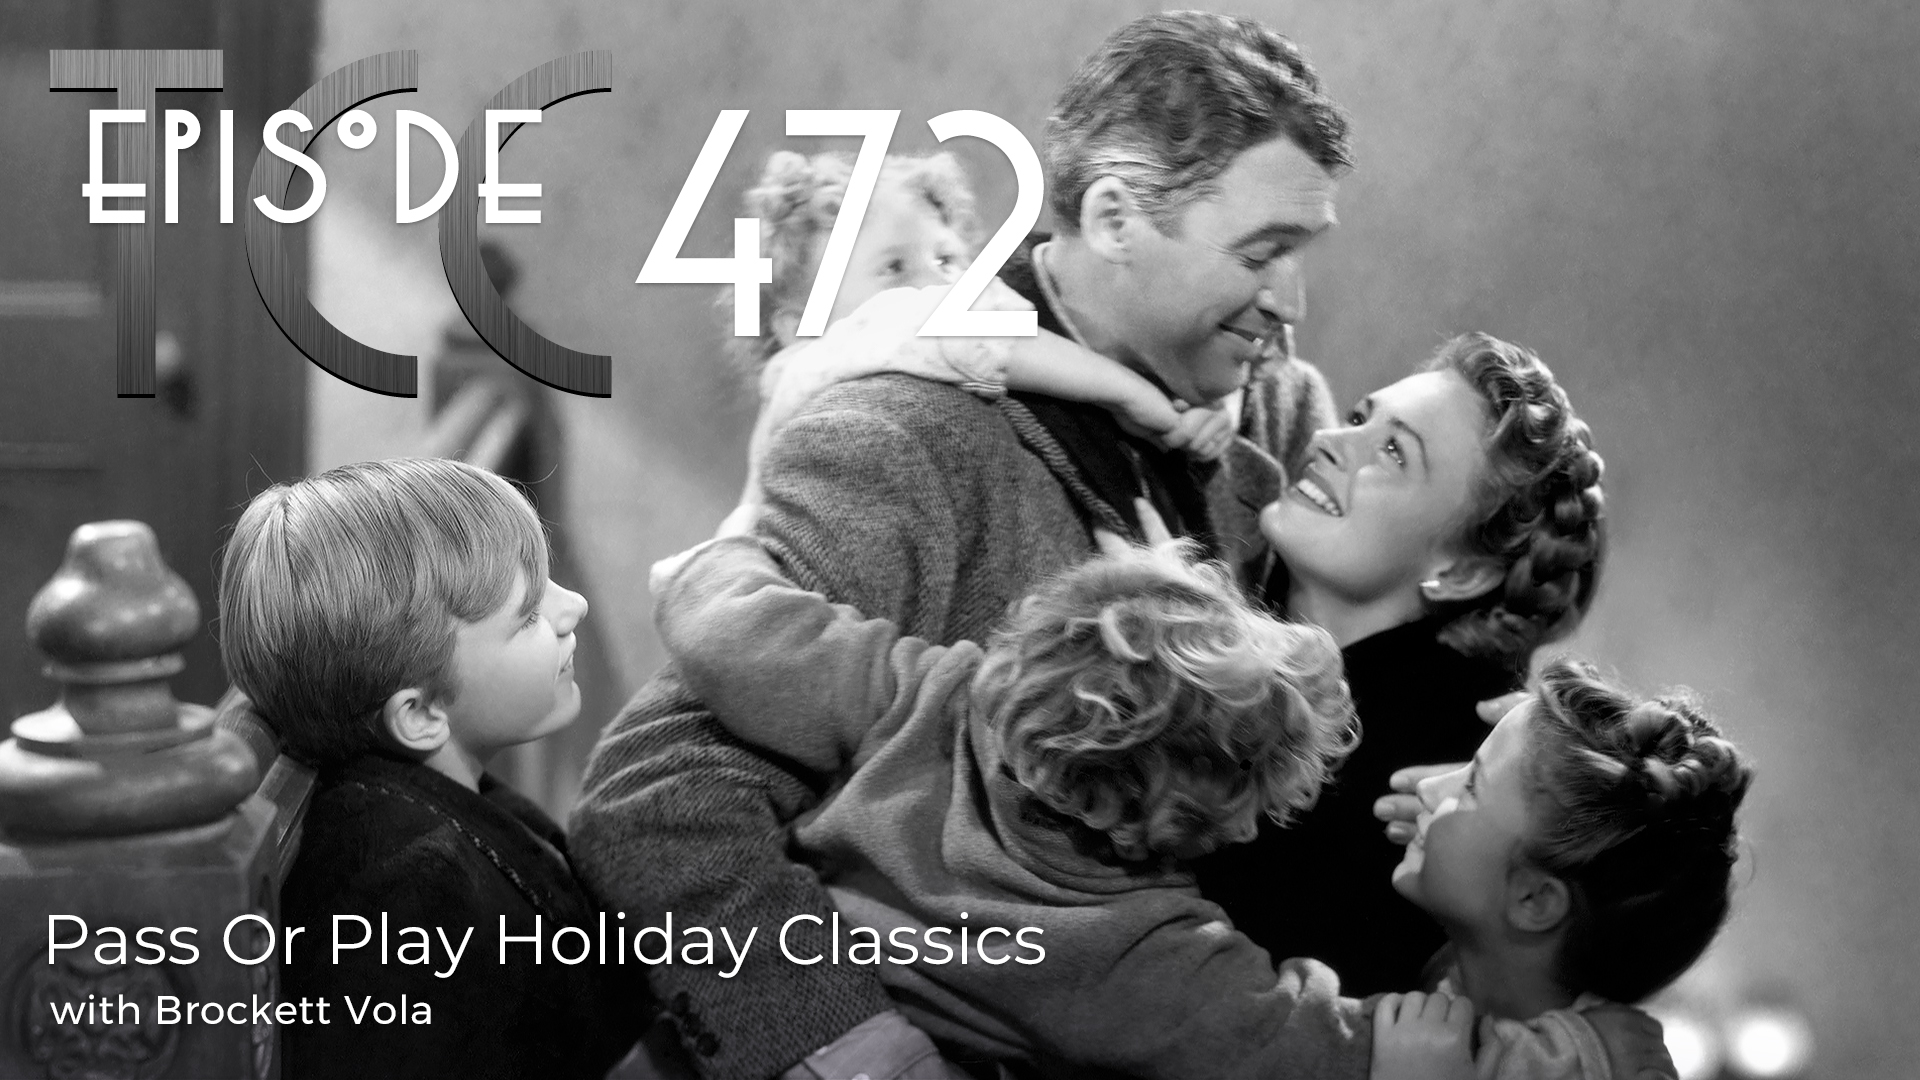 The Citadel Cafe 472: Pass Or Play Holiday Classics